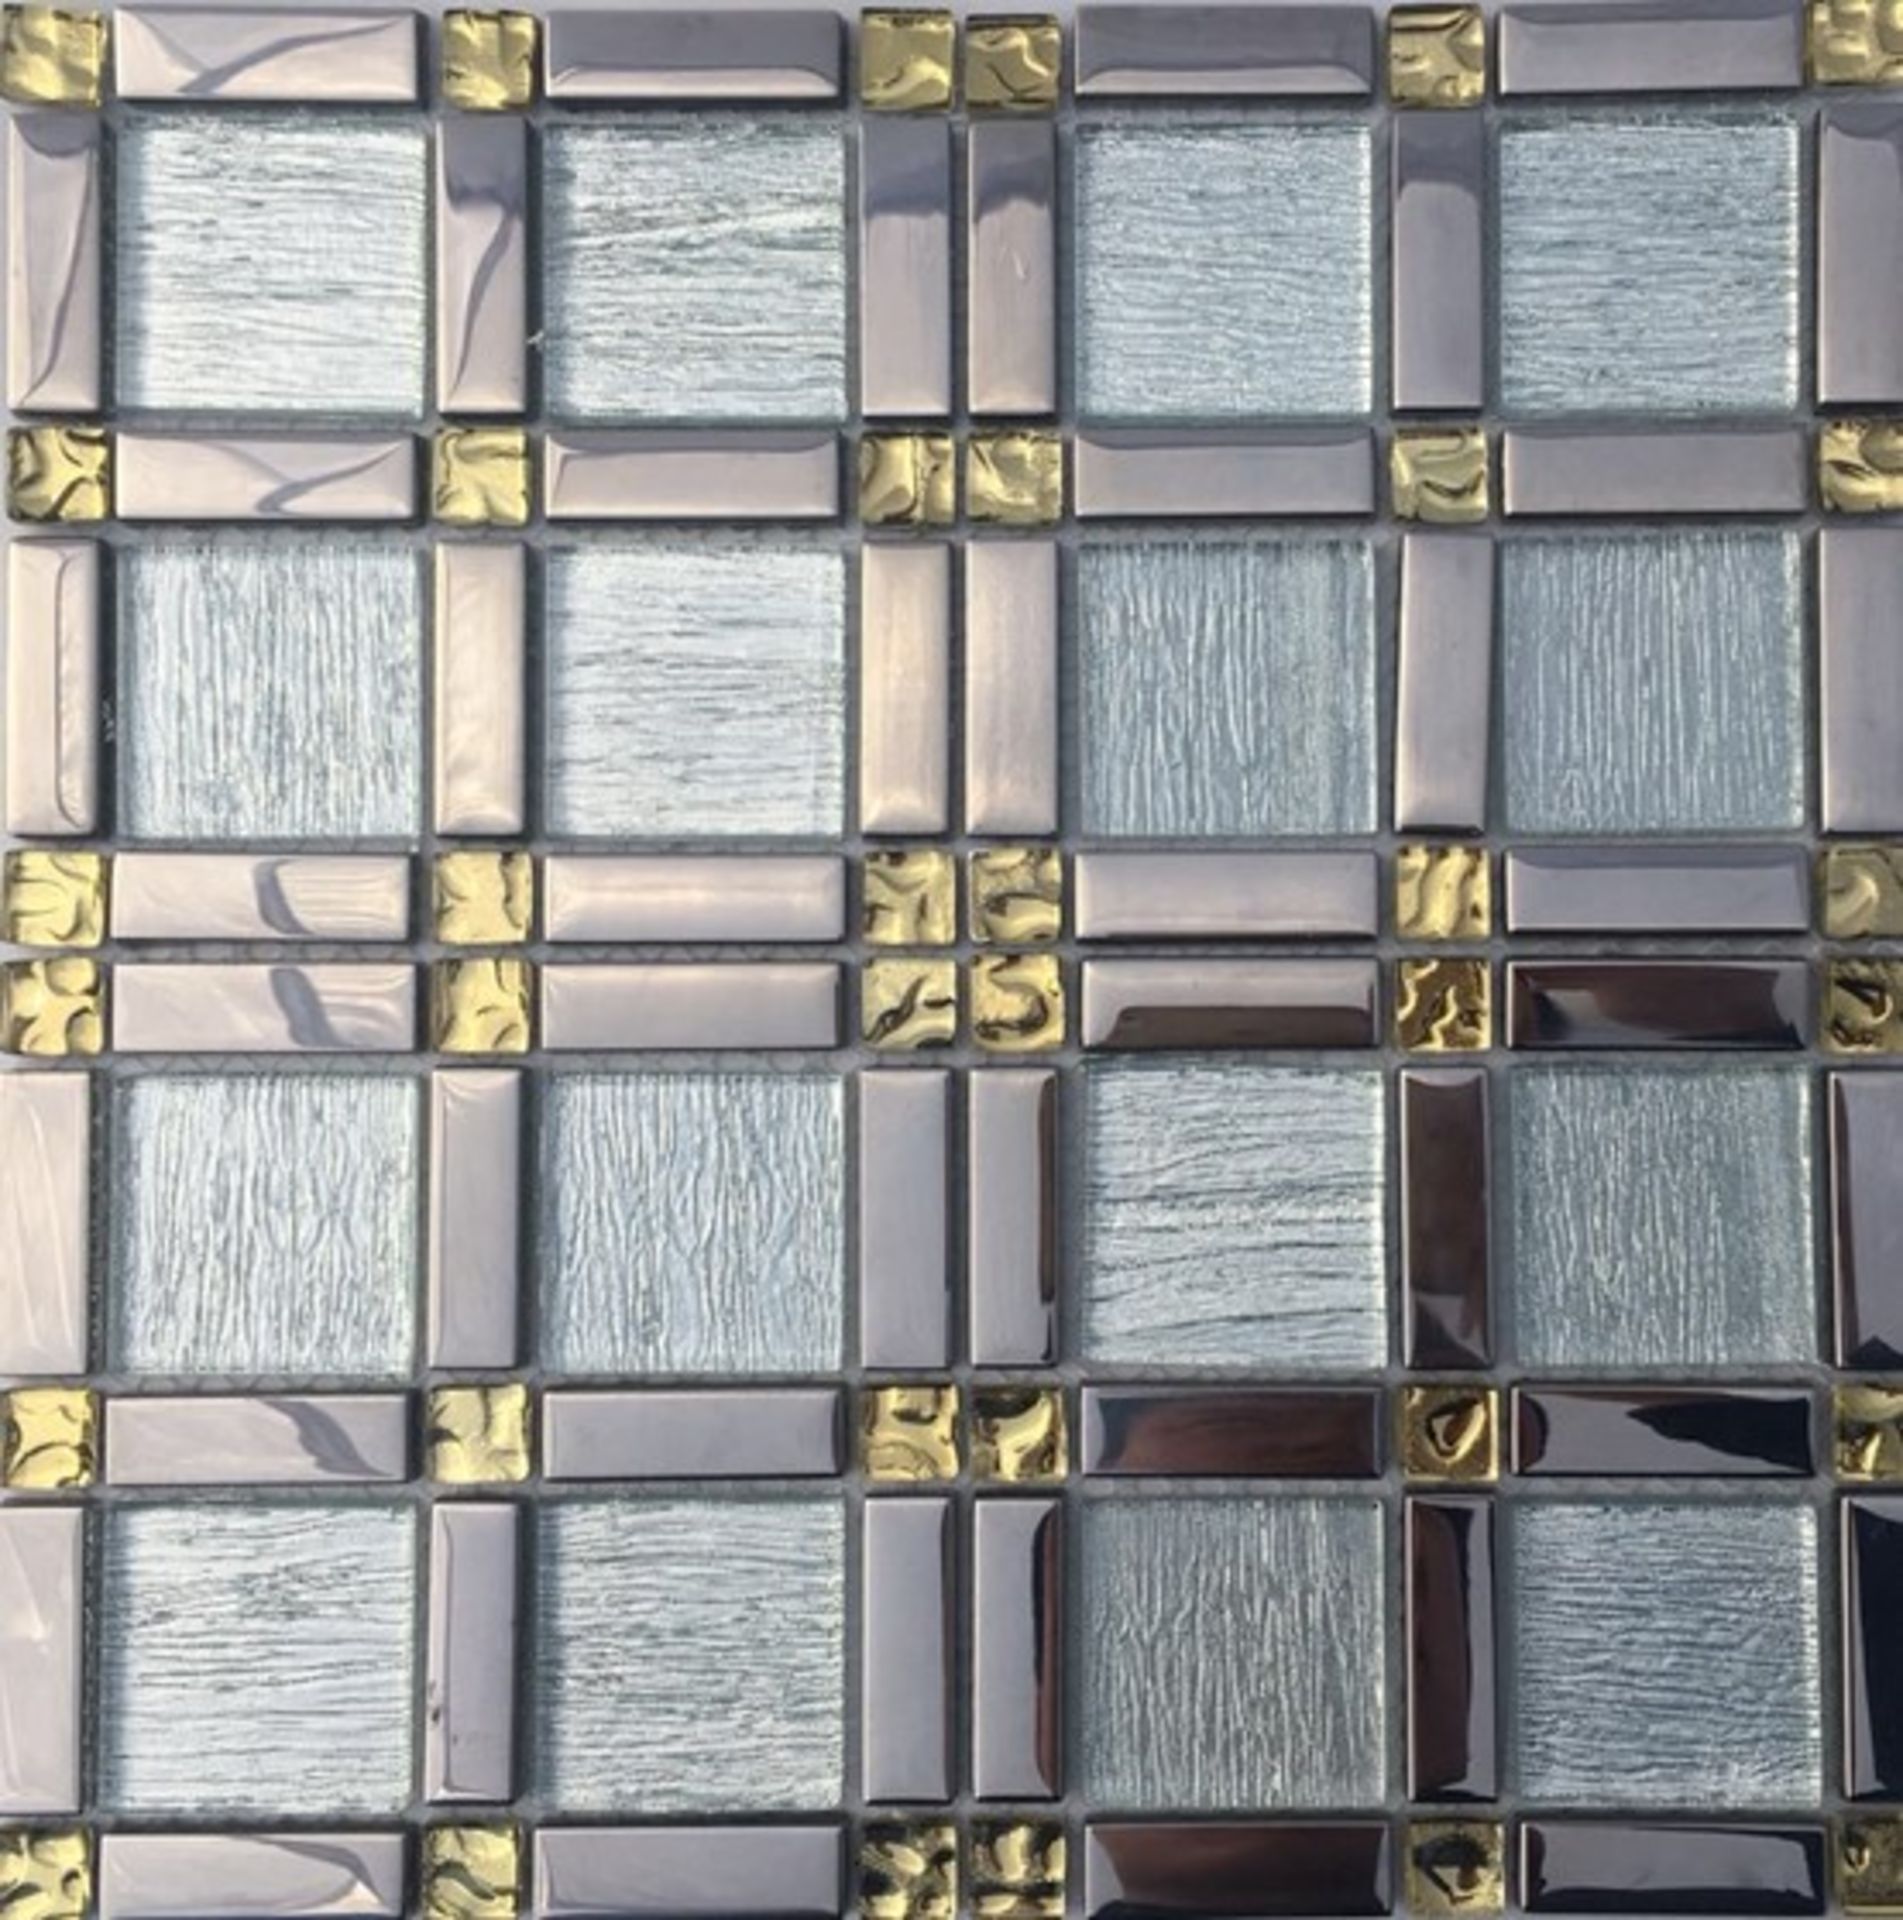 1 Pallet of 48 SQM (528 Sheets) Stock Clearance High Quality Glass Mosaic Tiles *PLUS VAT*